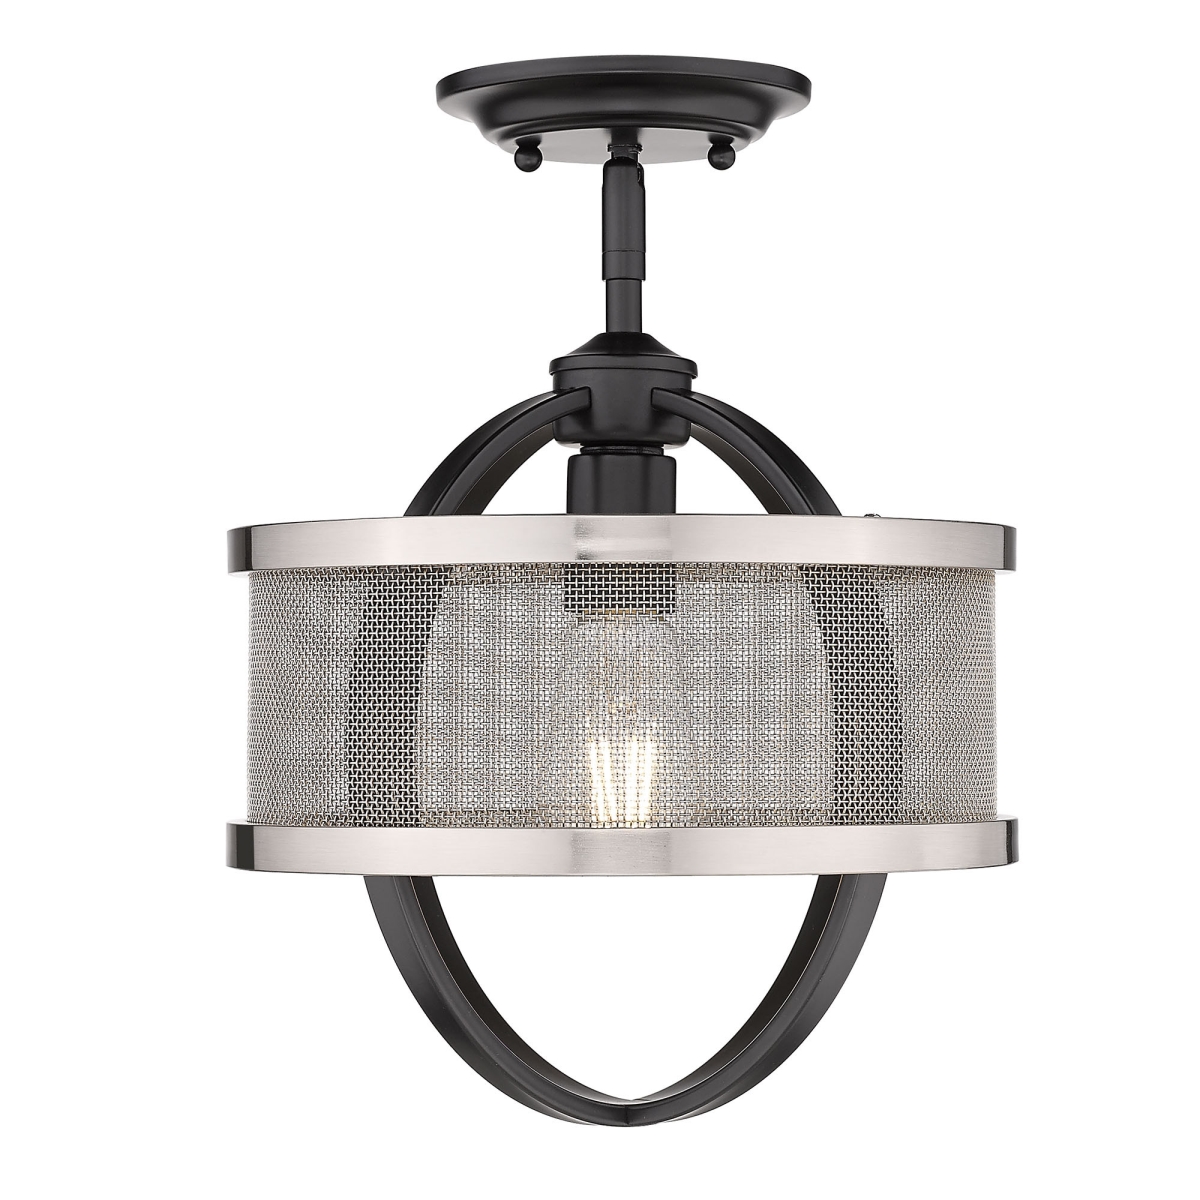 3167-1sf Blk-pw Colson With Pewter Shade, Matte Black